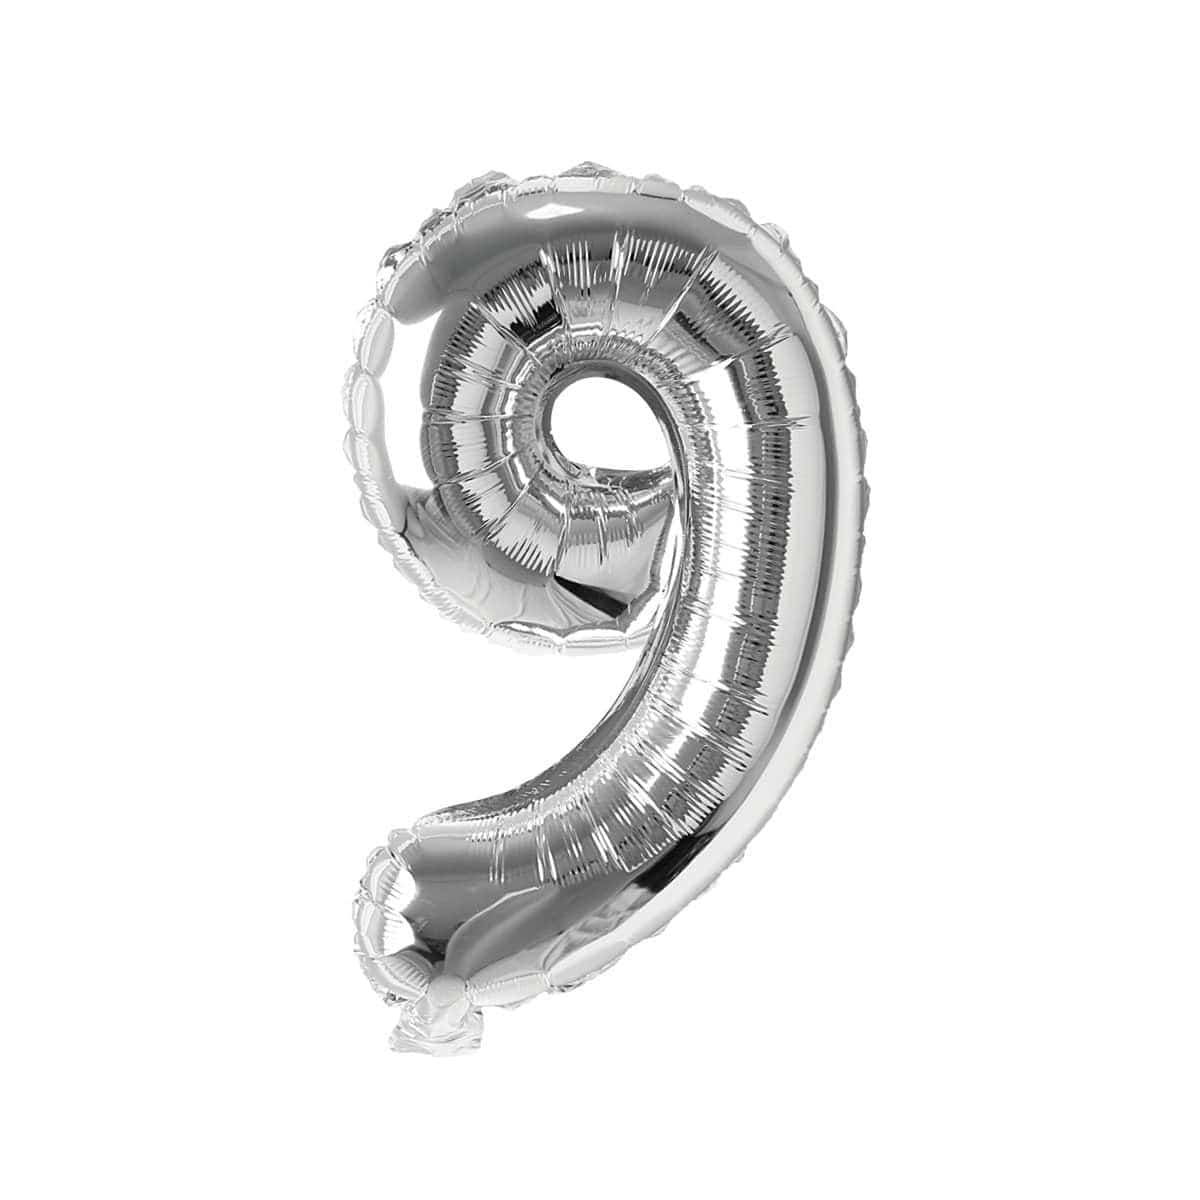 Buy Balloons Silver Number 9 Foil Balloon, 16 Inches sold at Party Expert